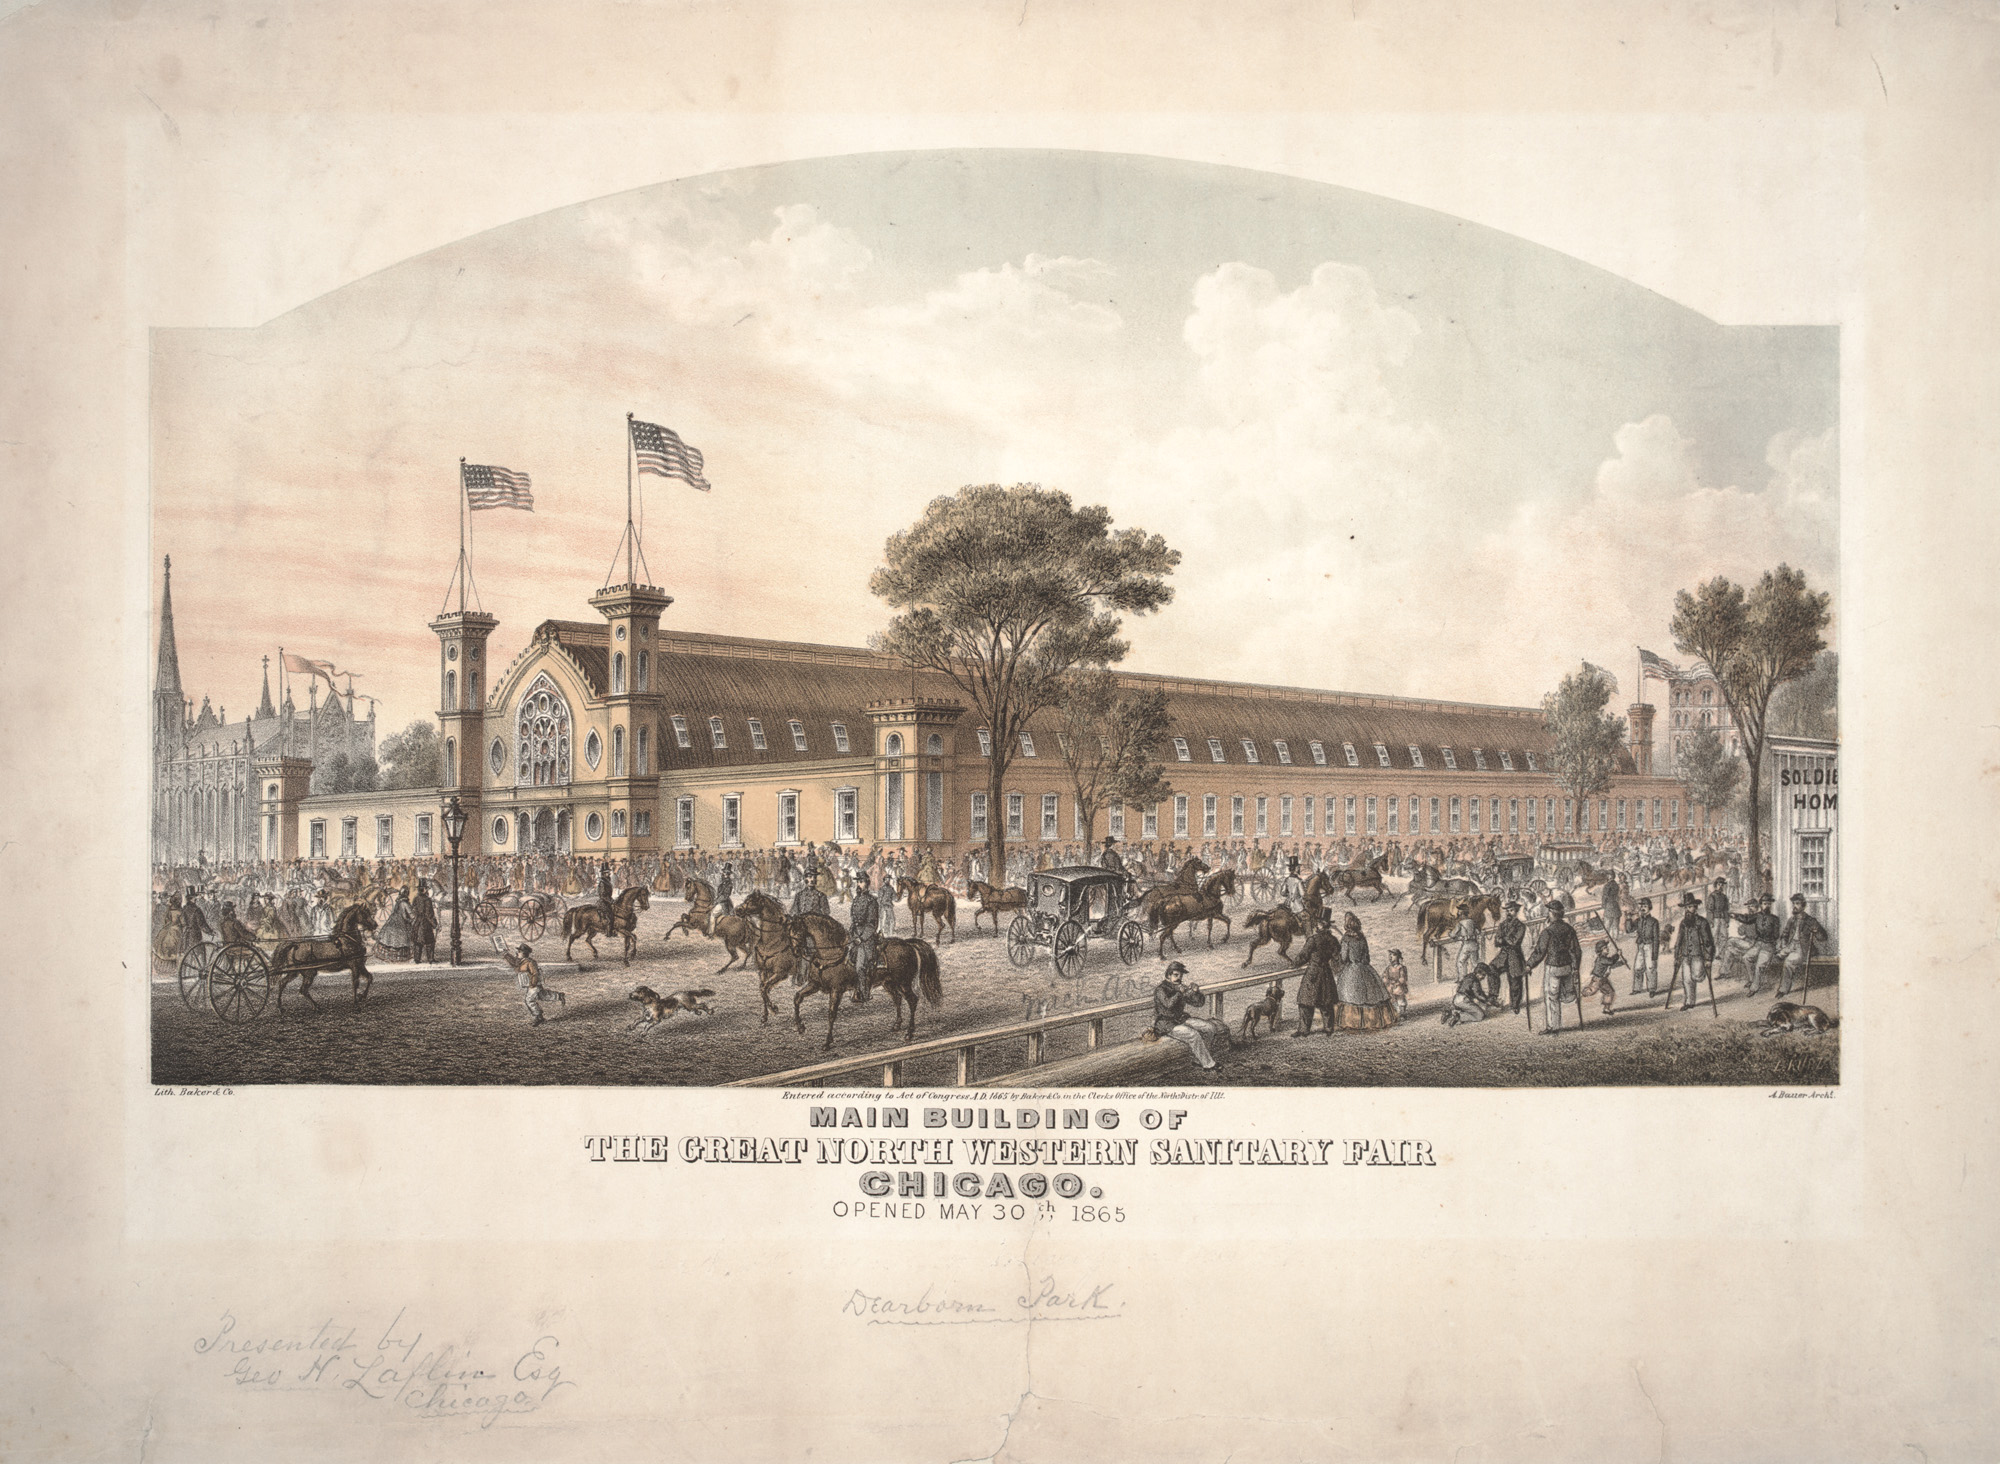 Louis Kurz, Main Building of the Great North Western Sanitary Fair, Chicago, 1865, lithograph, Baker & Co, 16 x 21 5/8 inches (Chicago History Museum)